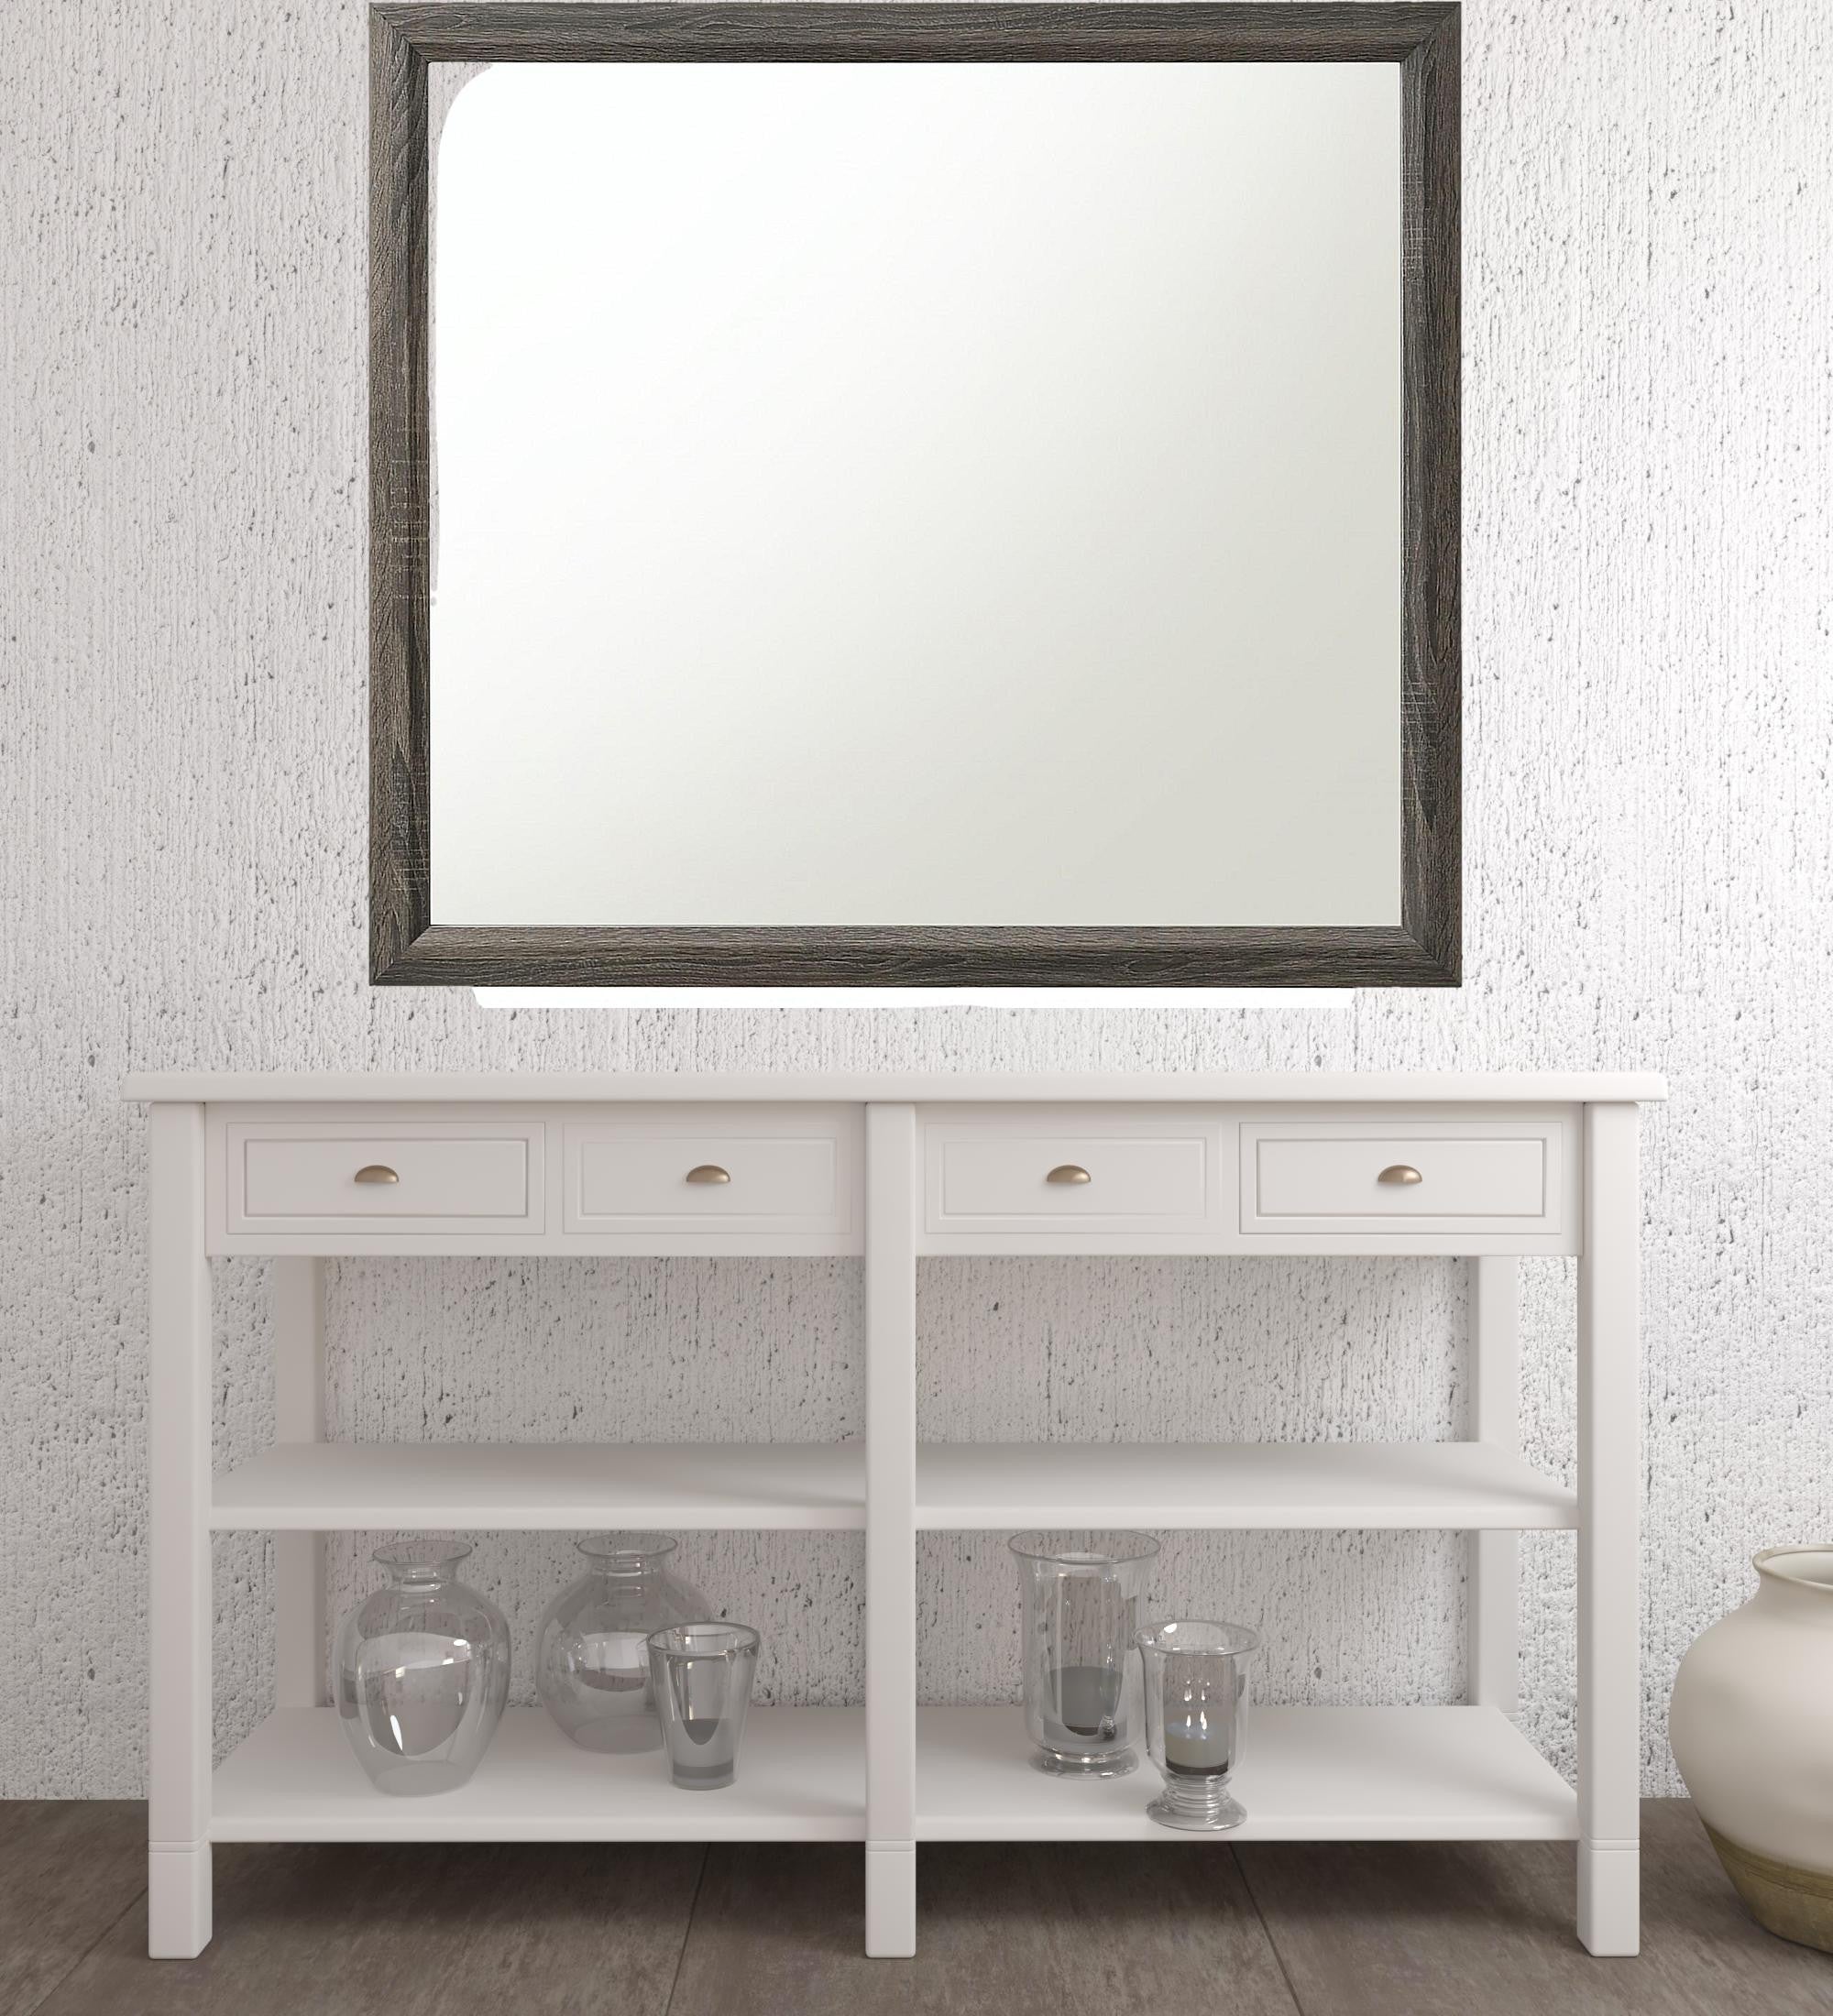 35" Rectangle Wall Mounted Accent Mirror With Frame